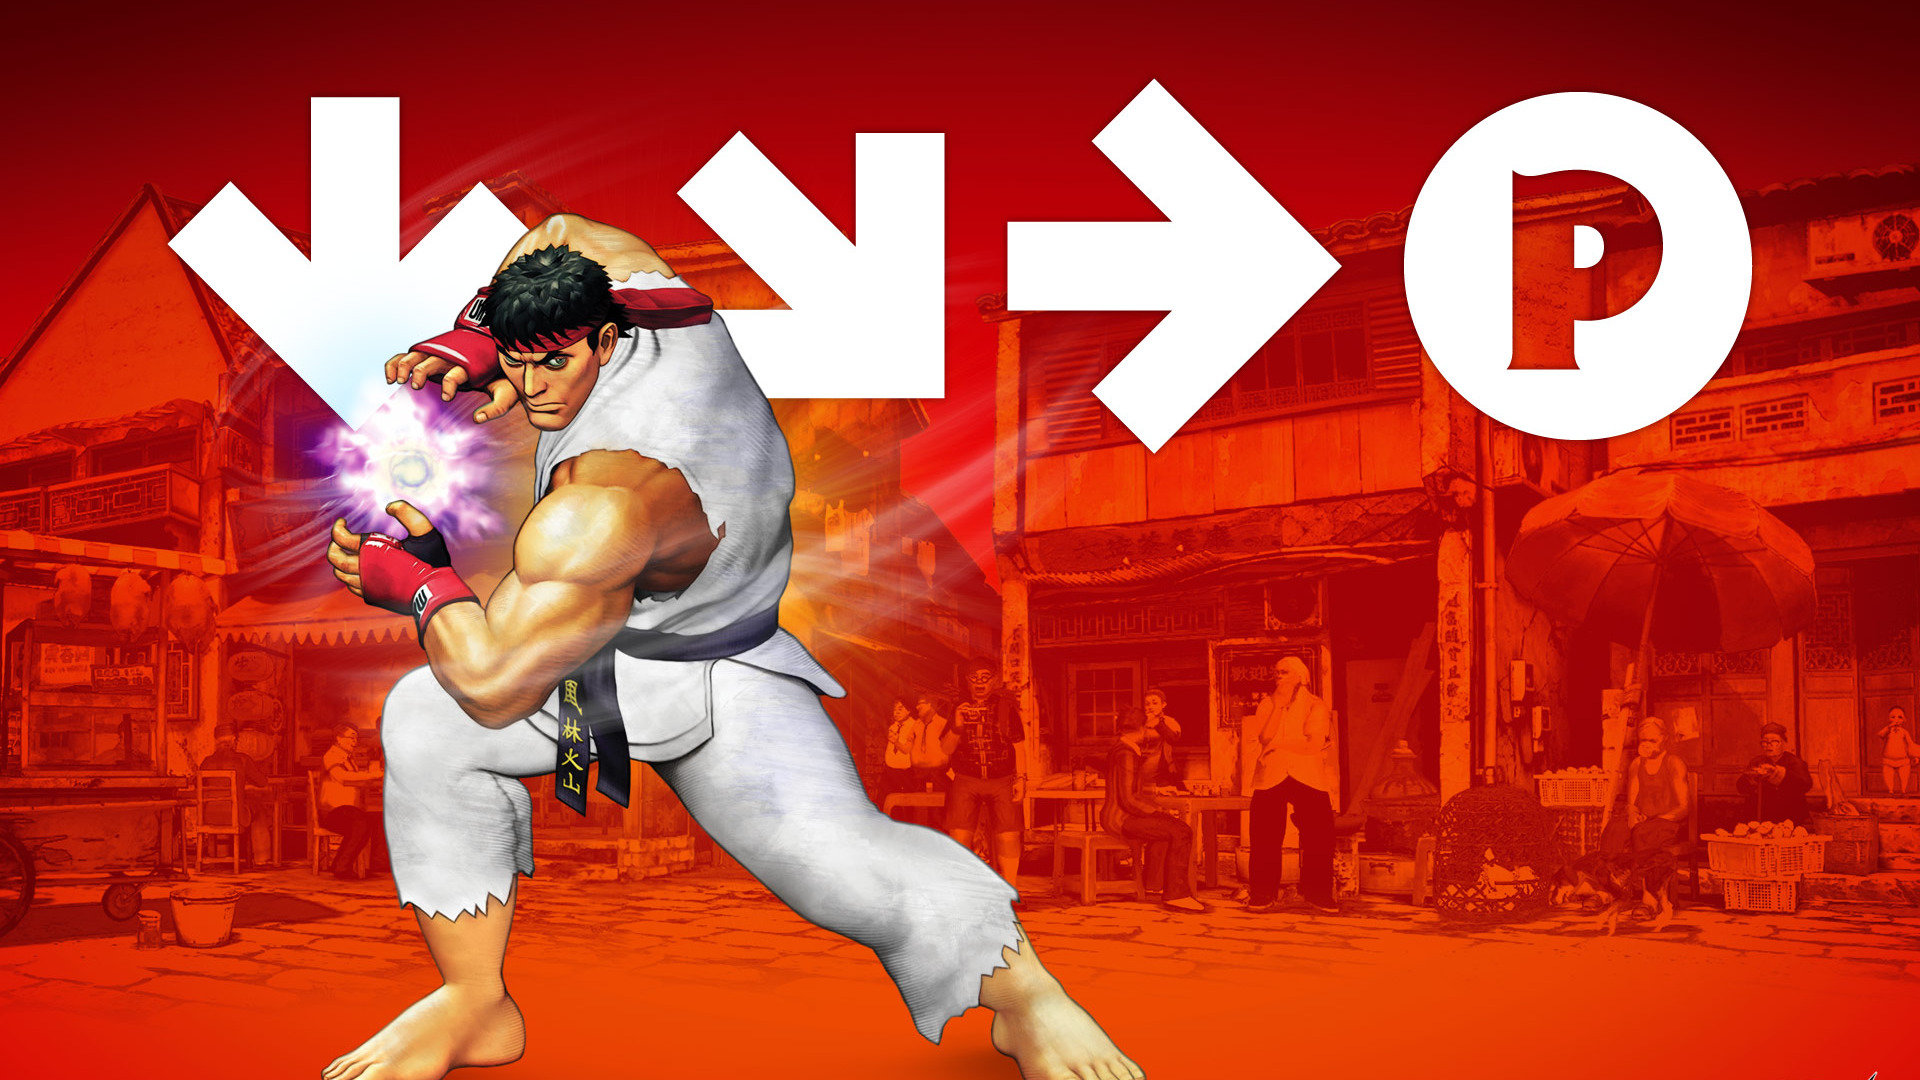 Download full hd 1920x1080 Street Fighter desktop background ID:466314 for free